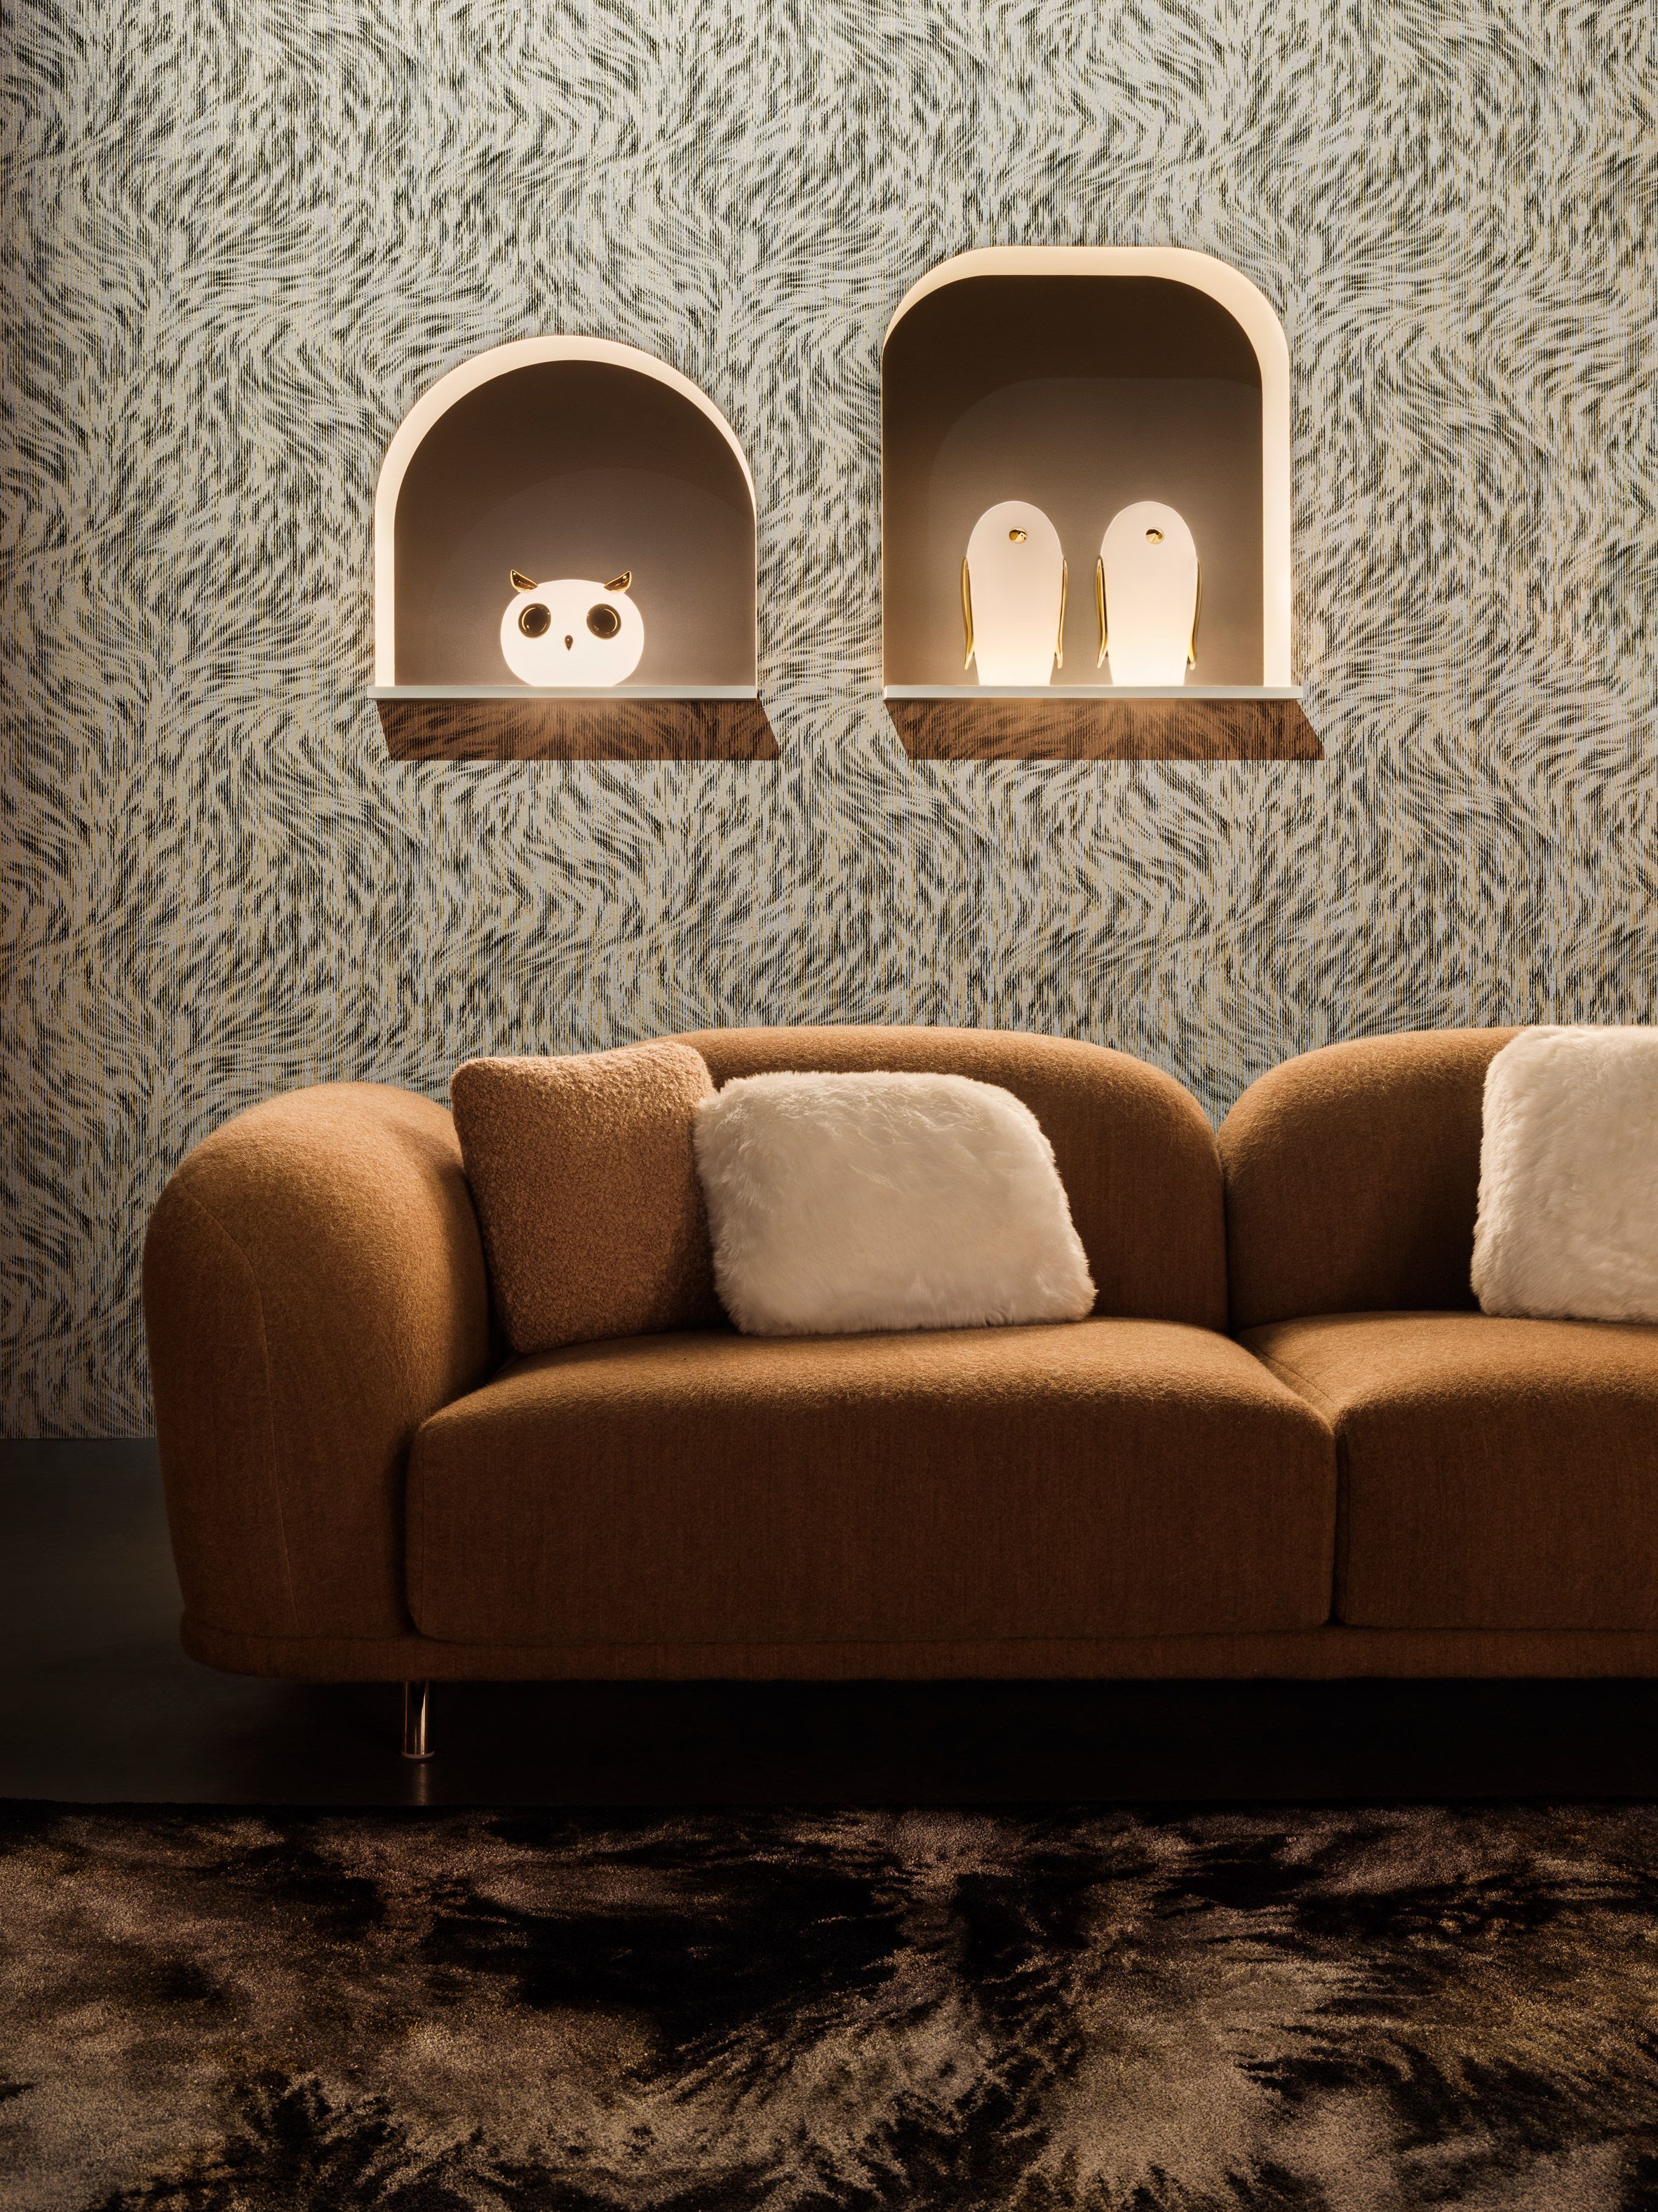 Moooi Wallpaper Inspired By Drawings Of Extinct Animals - Noot Noot Moooi Light , HD Wallpaper & Backgrounds